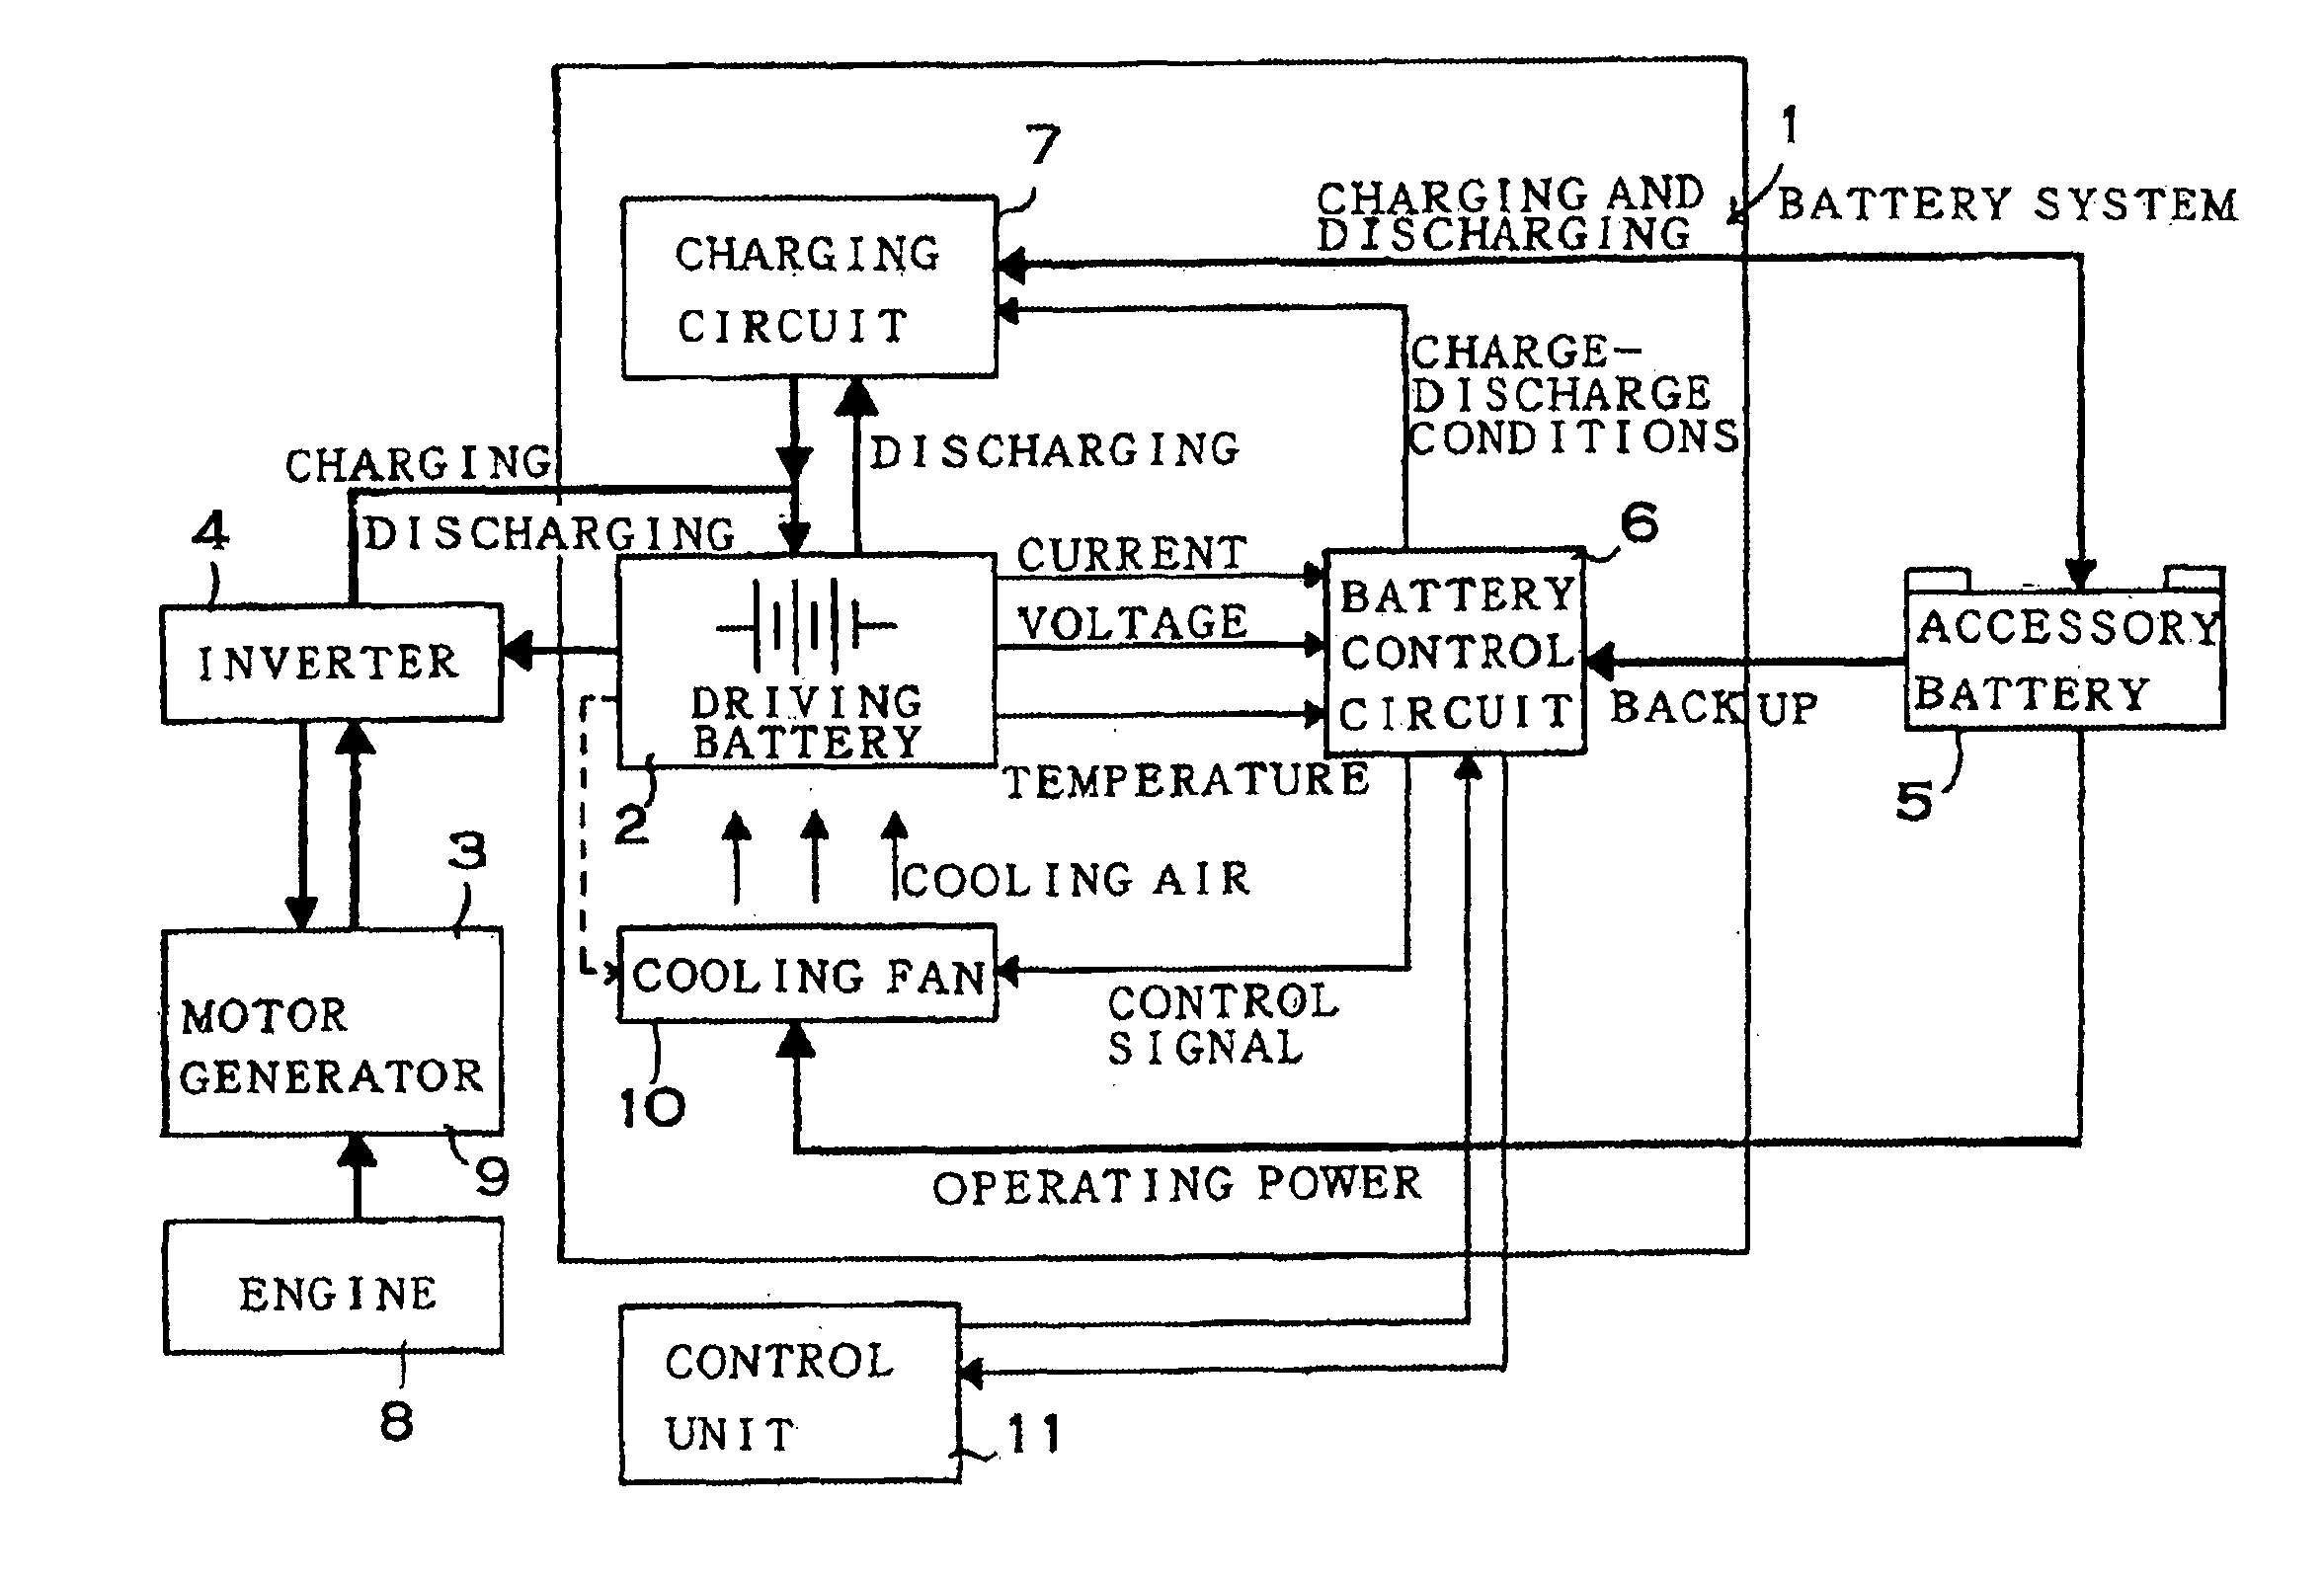 Power source apparatus for an electric automobile